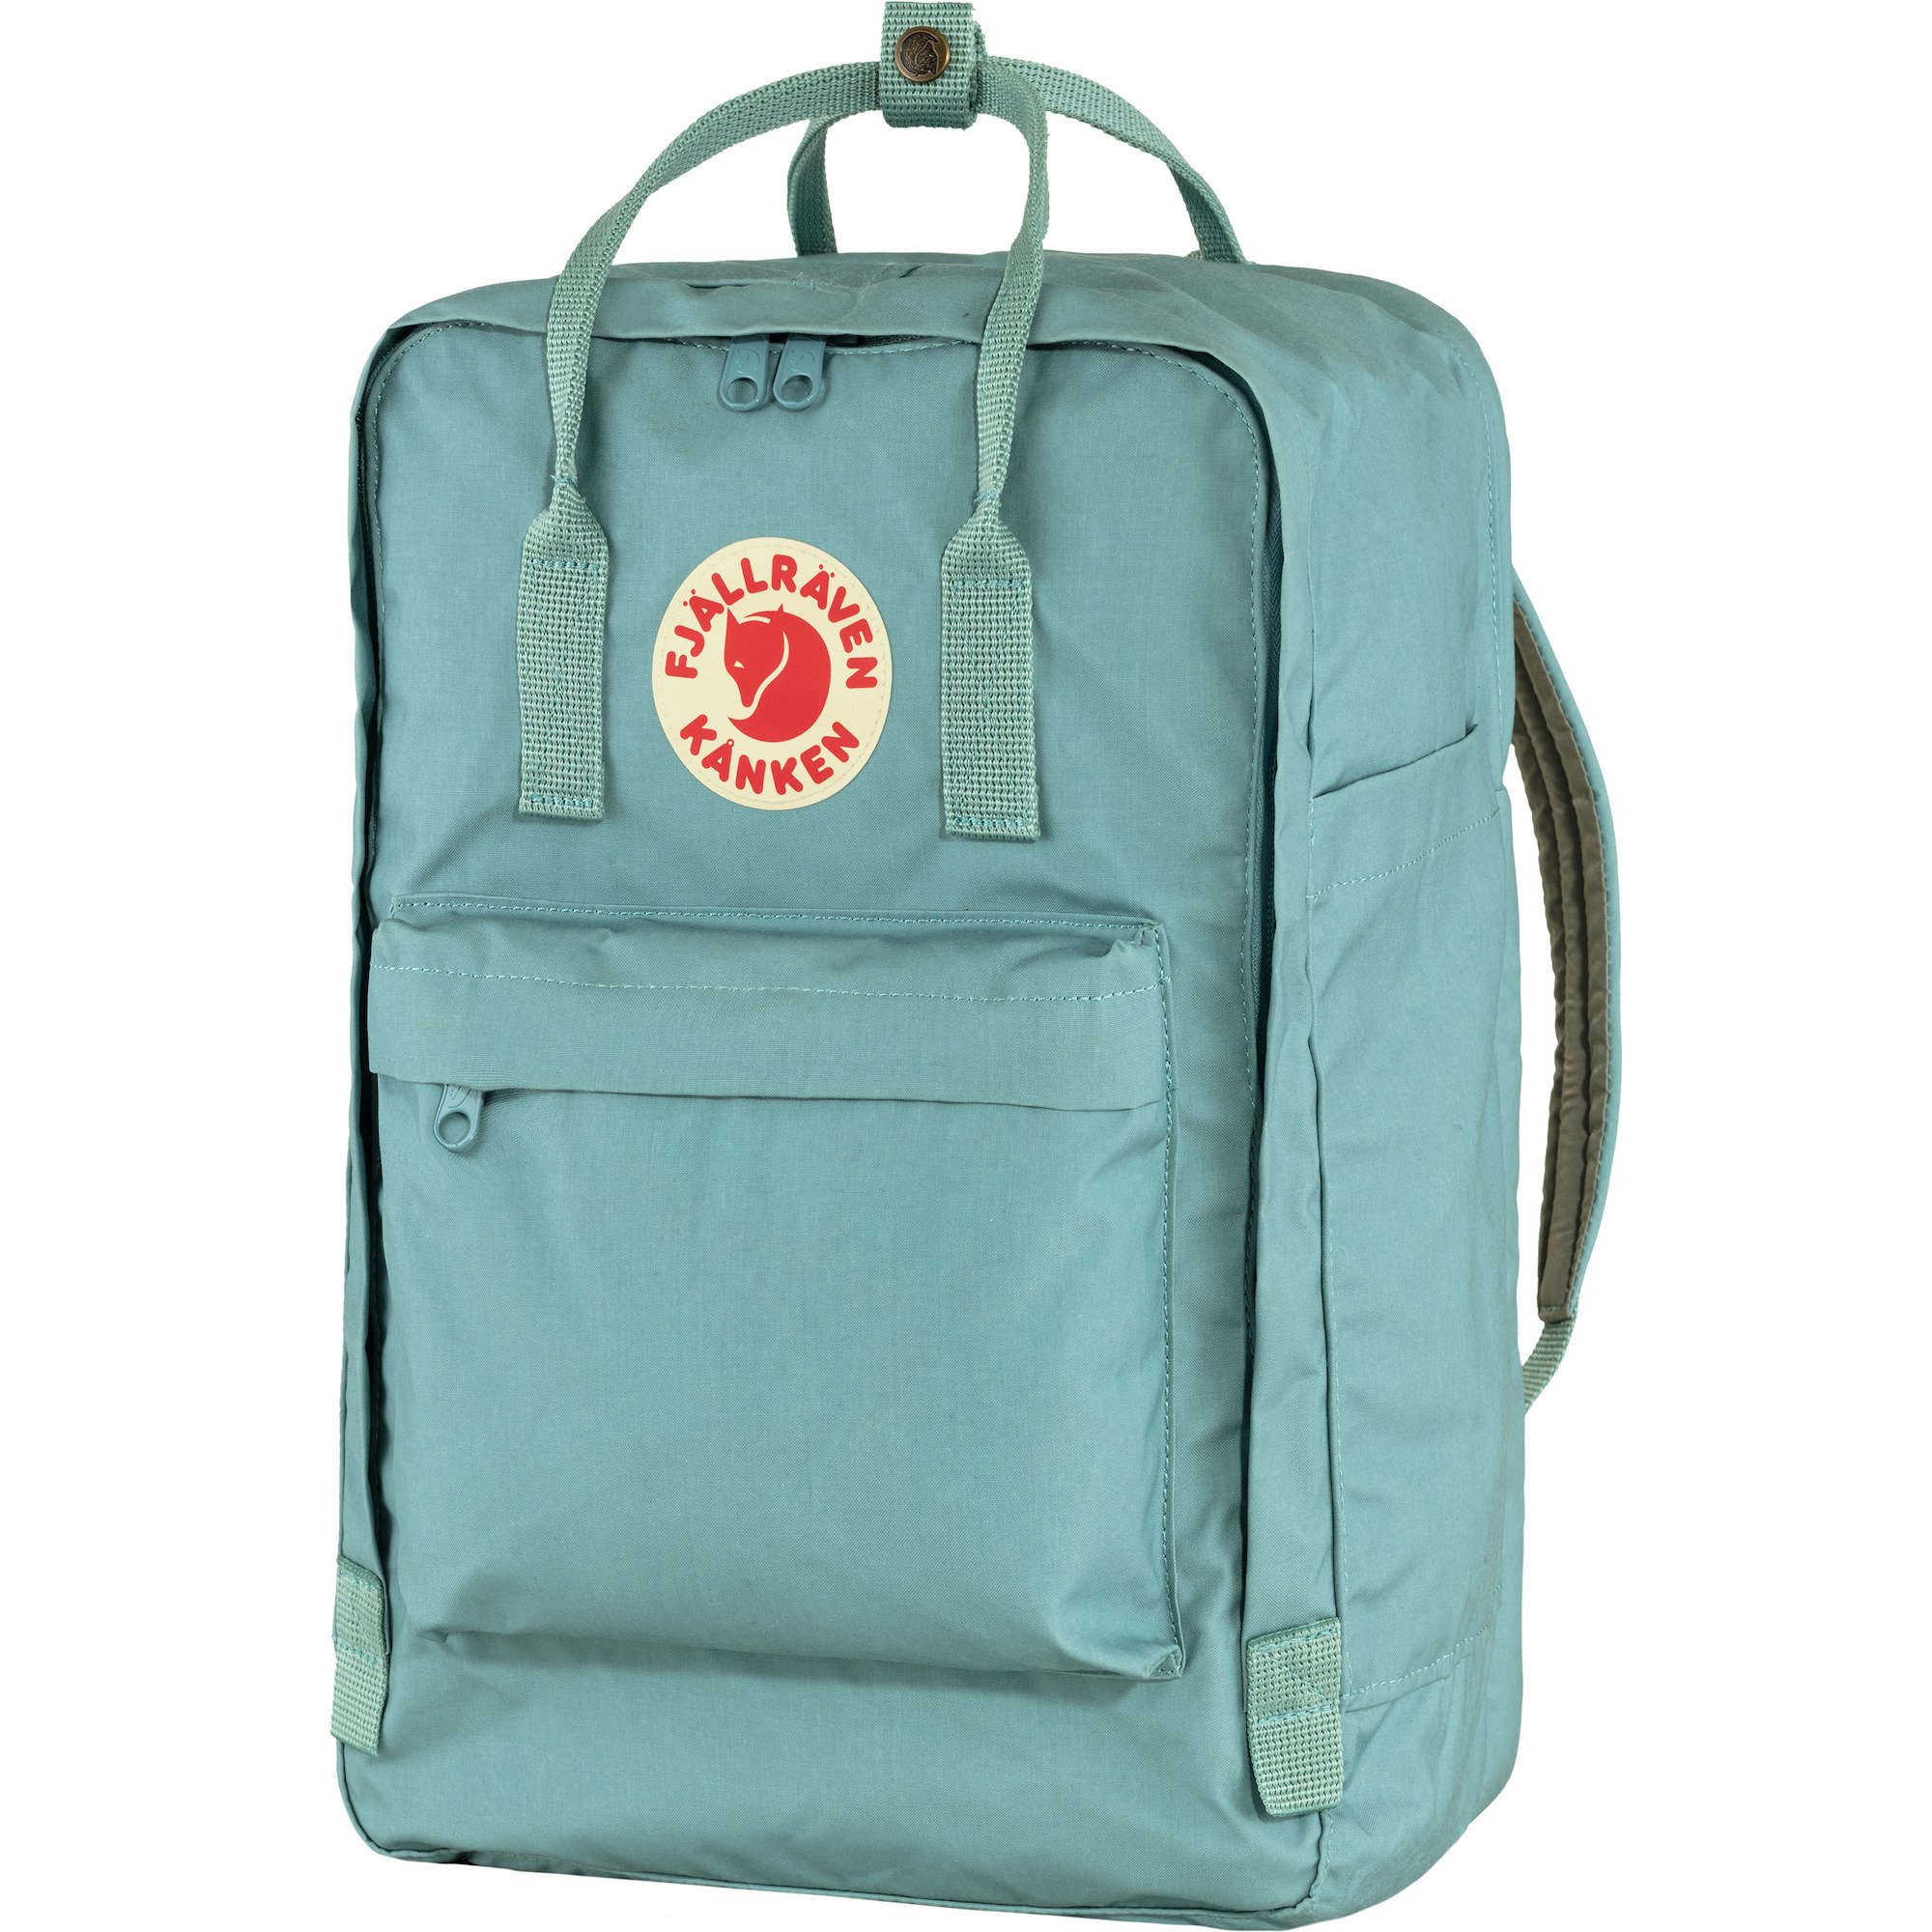 Fjallraven Kanken 17in Pack | 4.4 Star Rating w/ Free Shipping and Handling